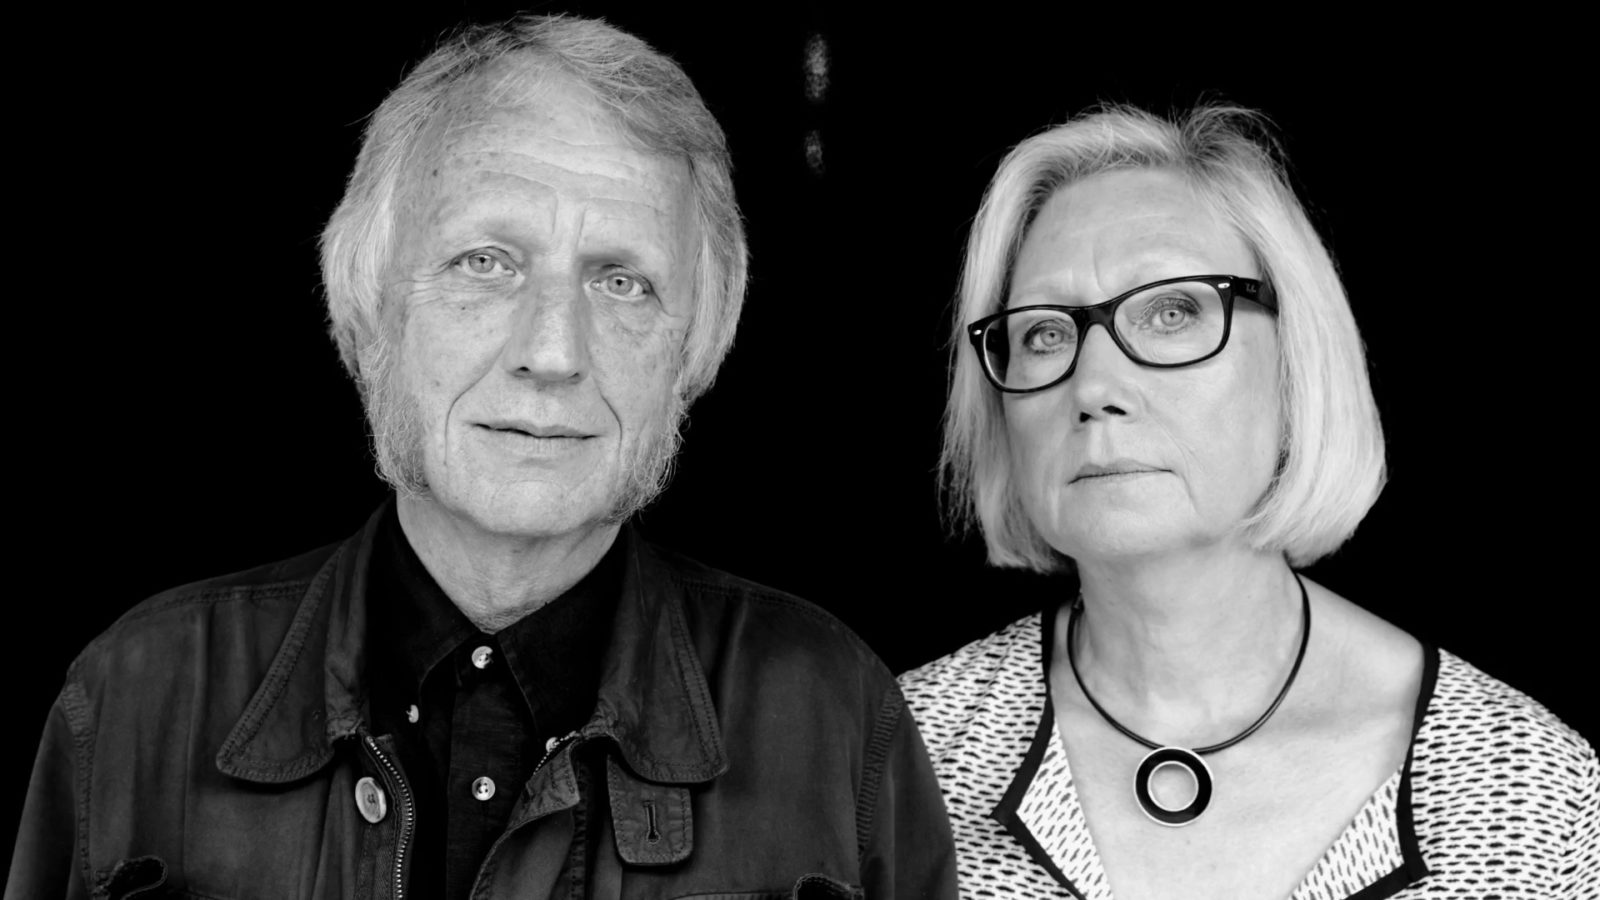 Ageing man and woman dressed in black and white, Knut Hagberg and Marianne Hagberg, carrying simple wooden table together.